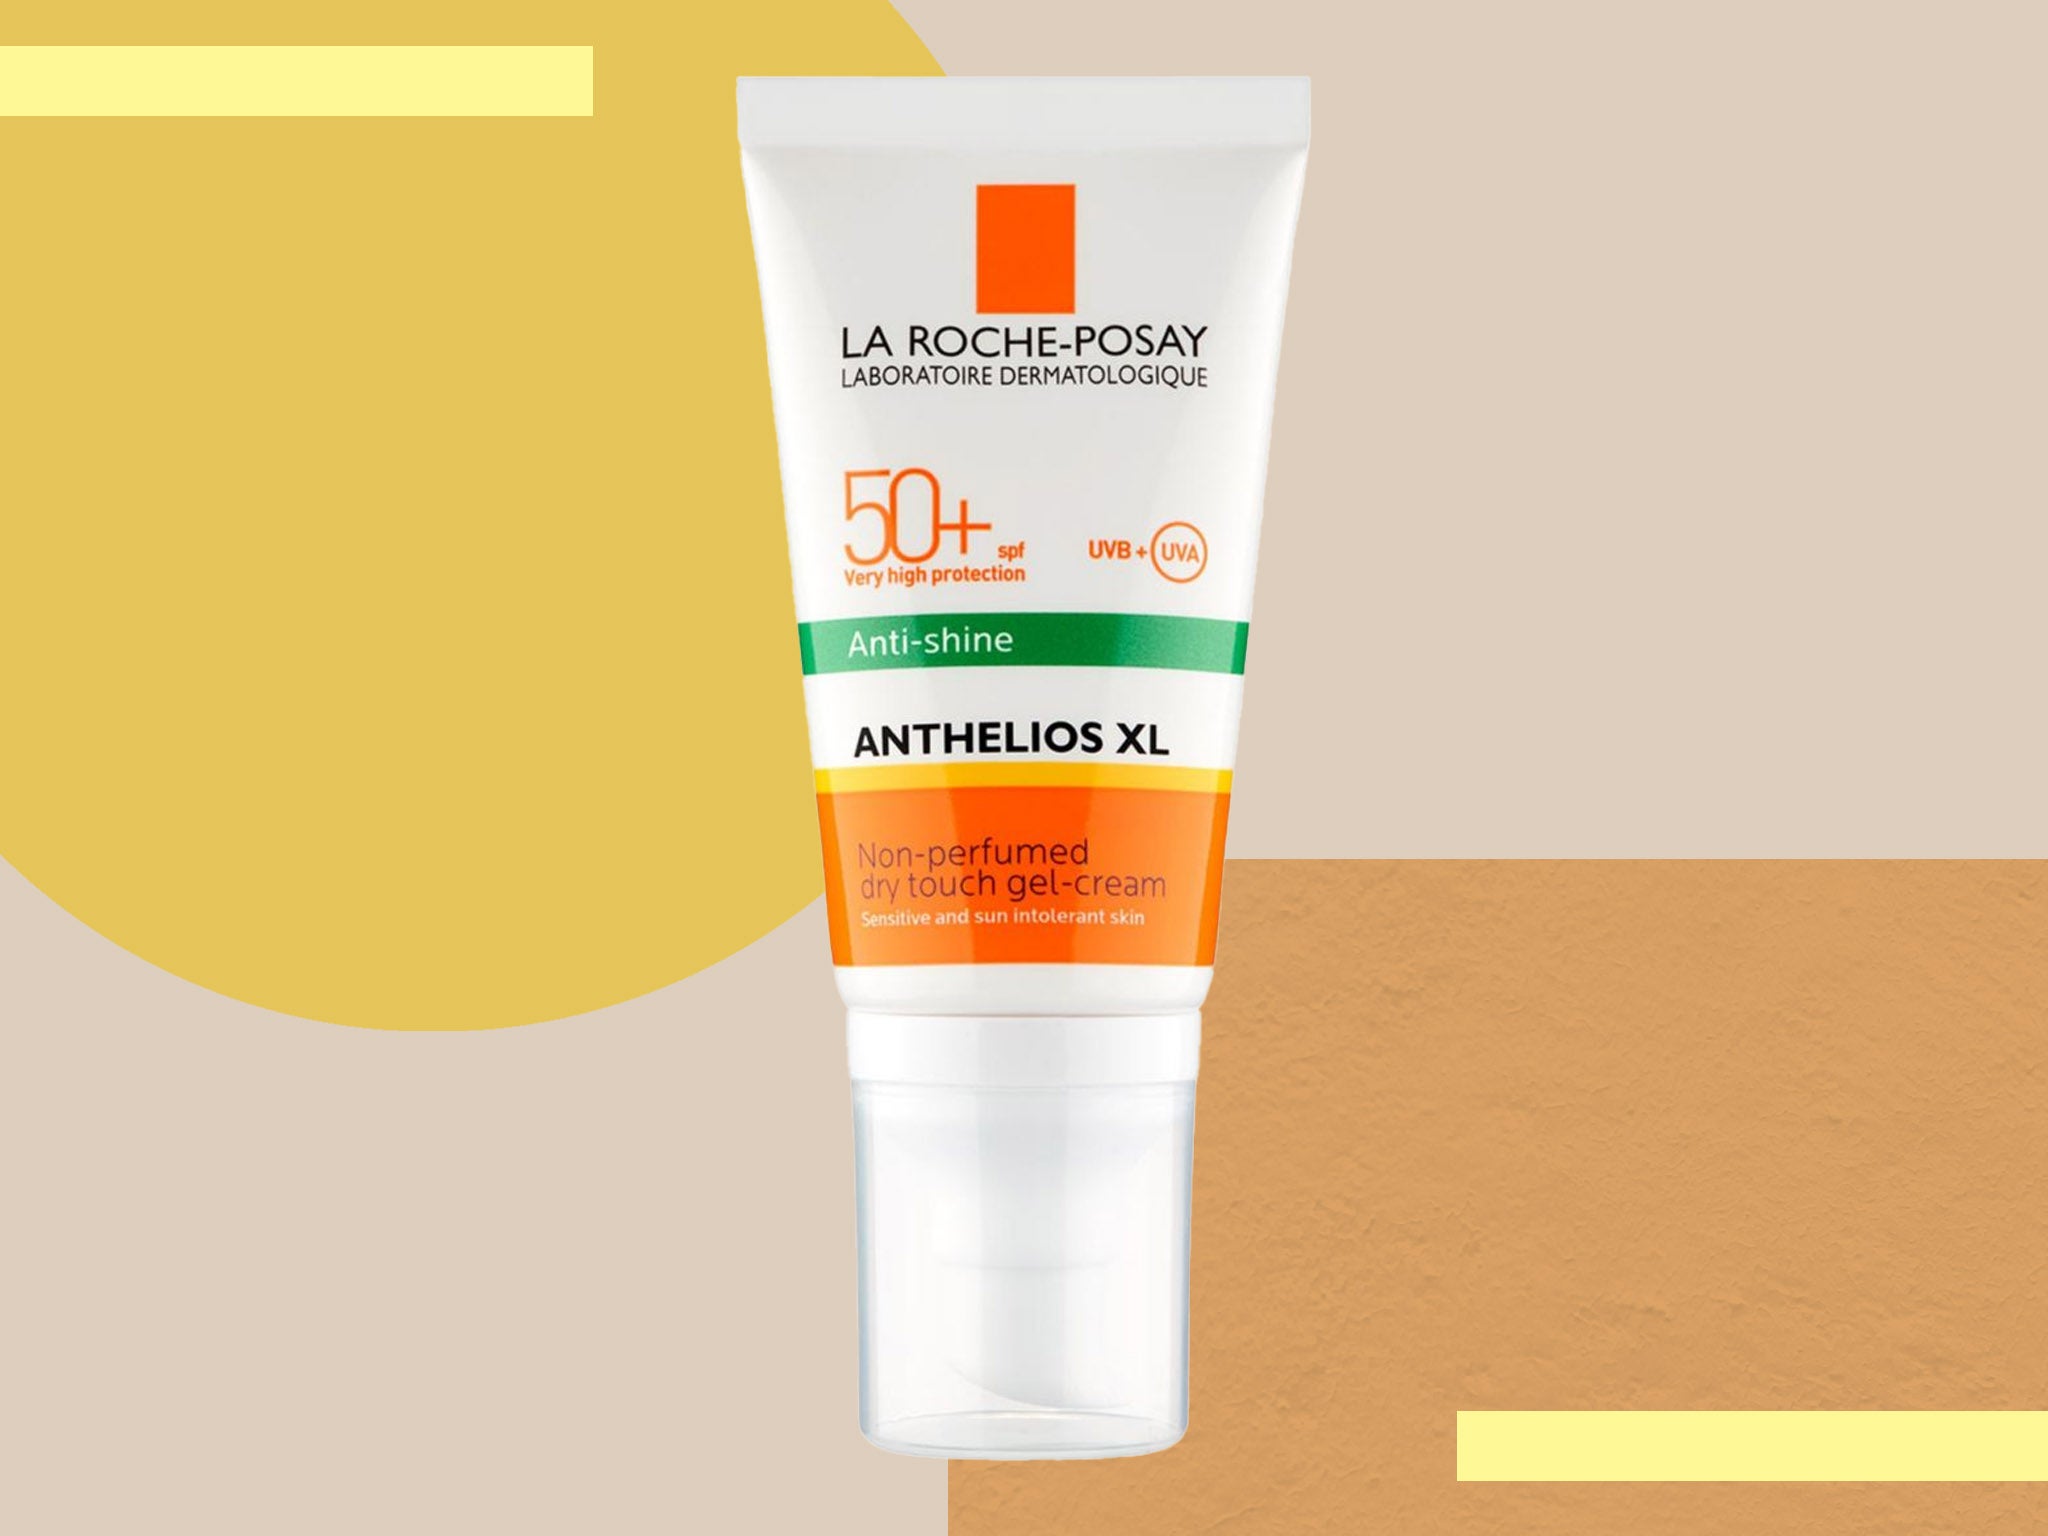 La Roche-Posay anthelios sunscreen gel: An SPF for oily | The Independent